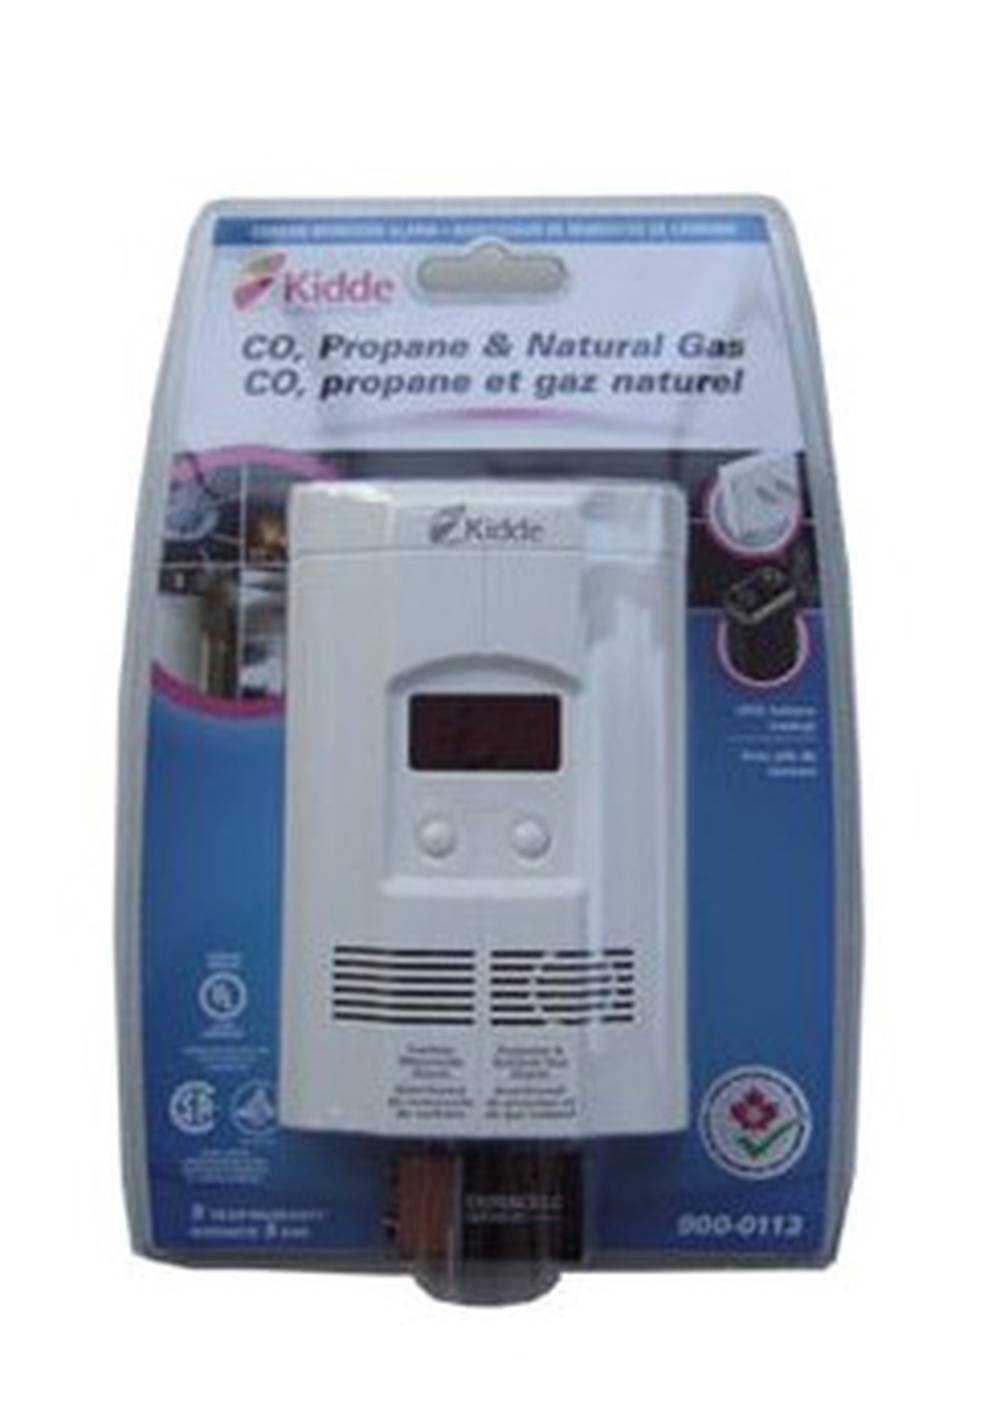 The Difference Between Natural Gas and Carbon Monoxide Detectors